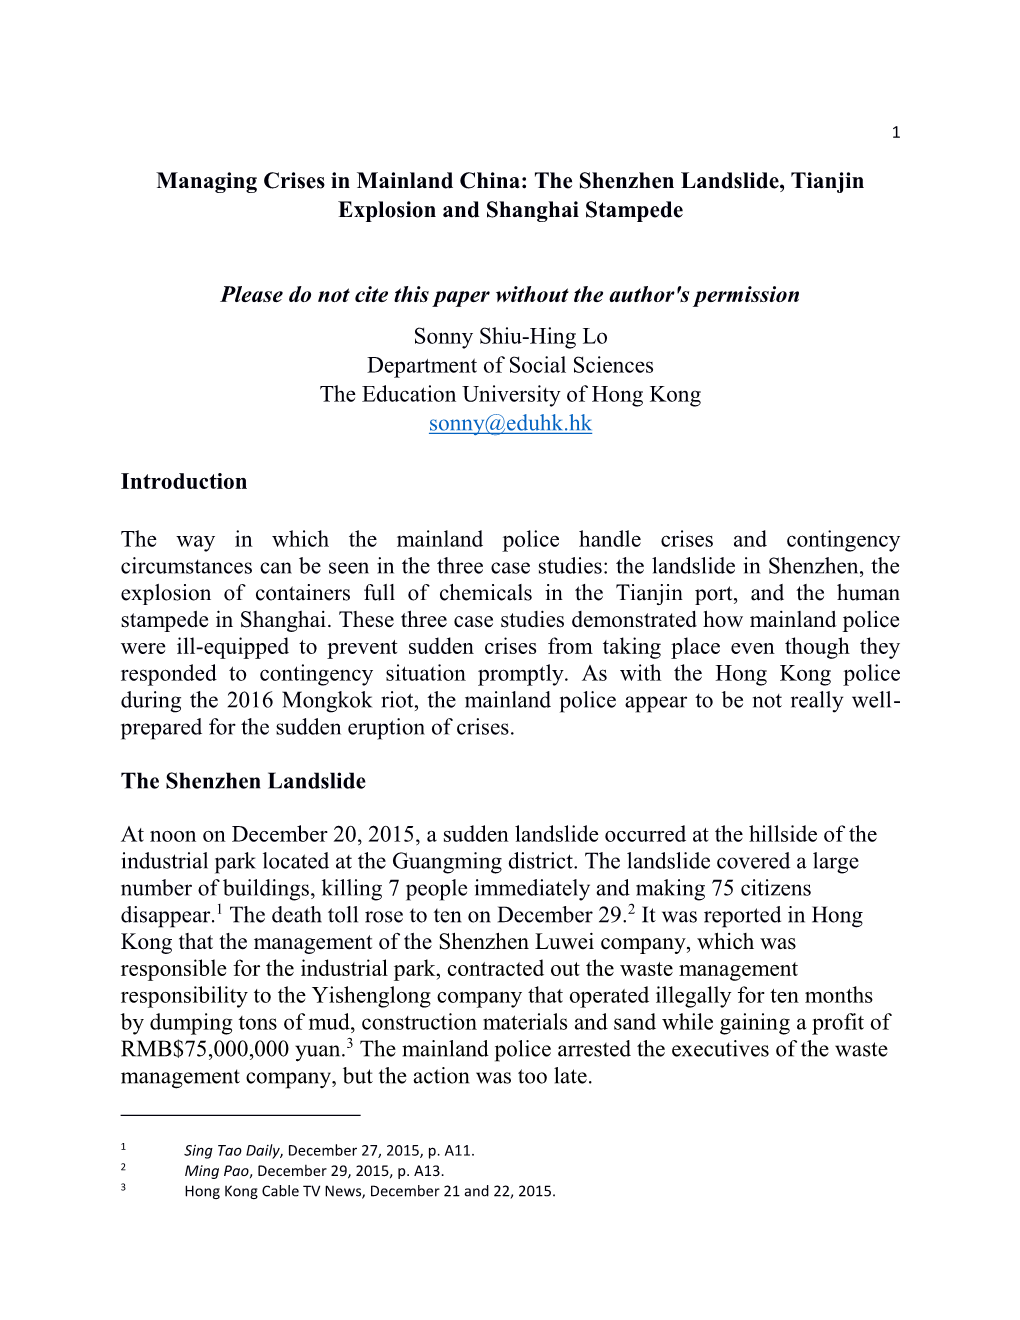 Managing Crises in Mainland China: the Shenzhen Landslide, Tianjin Explosion and Shanghai Stampede